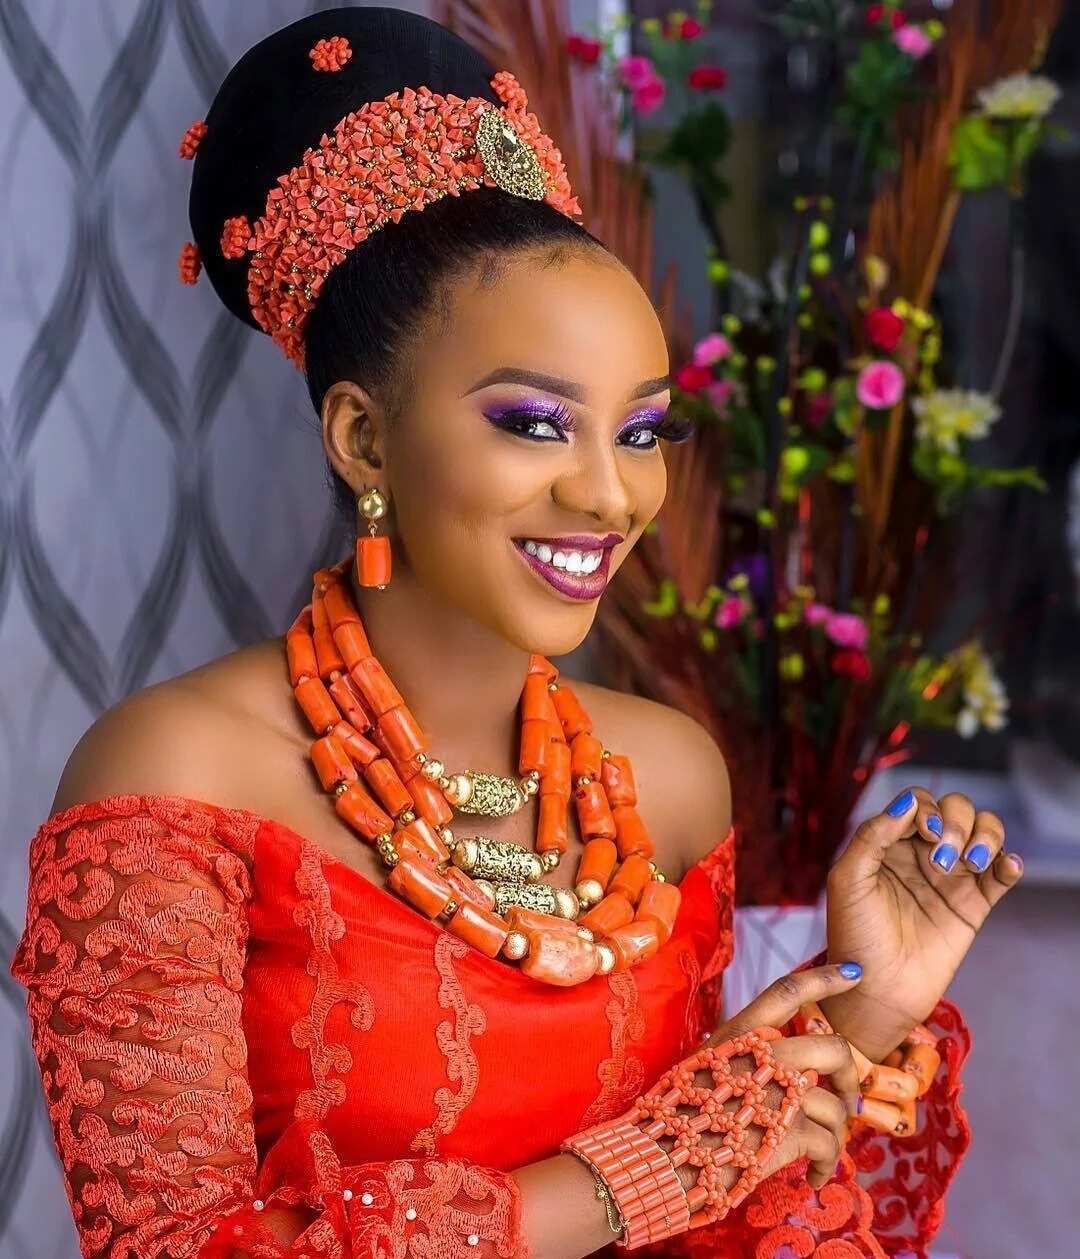 Igbo traditional wedding attire ideas for bride and groom 